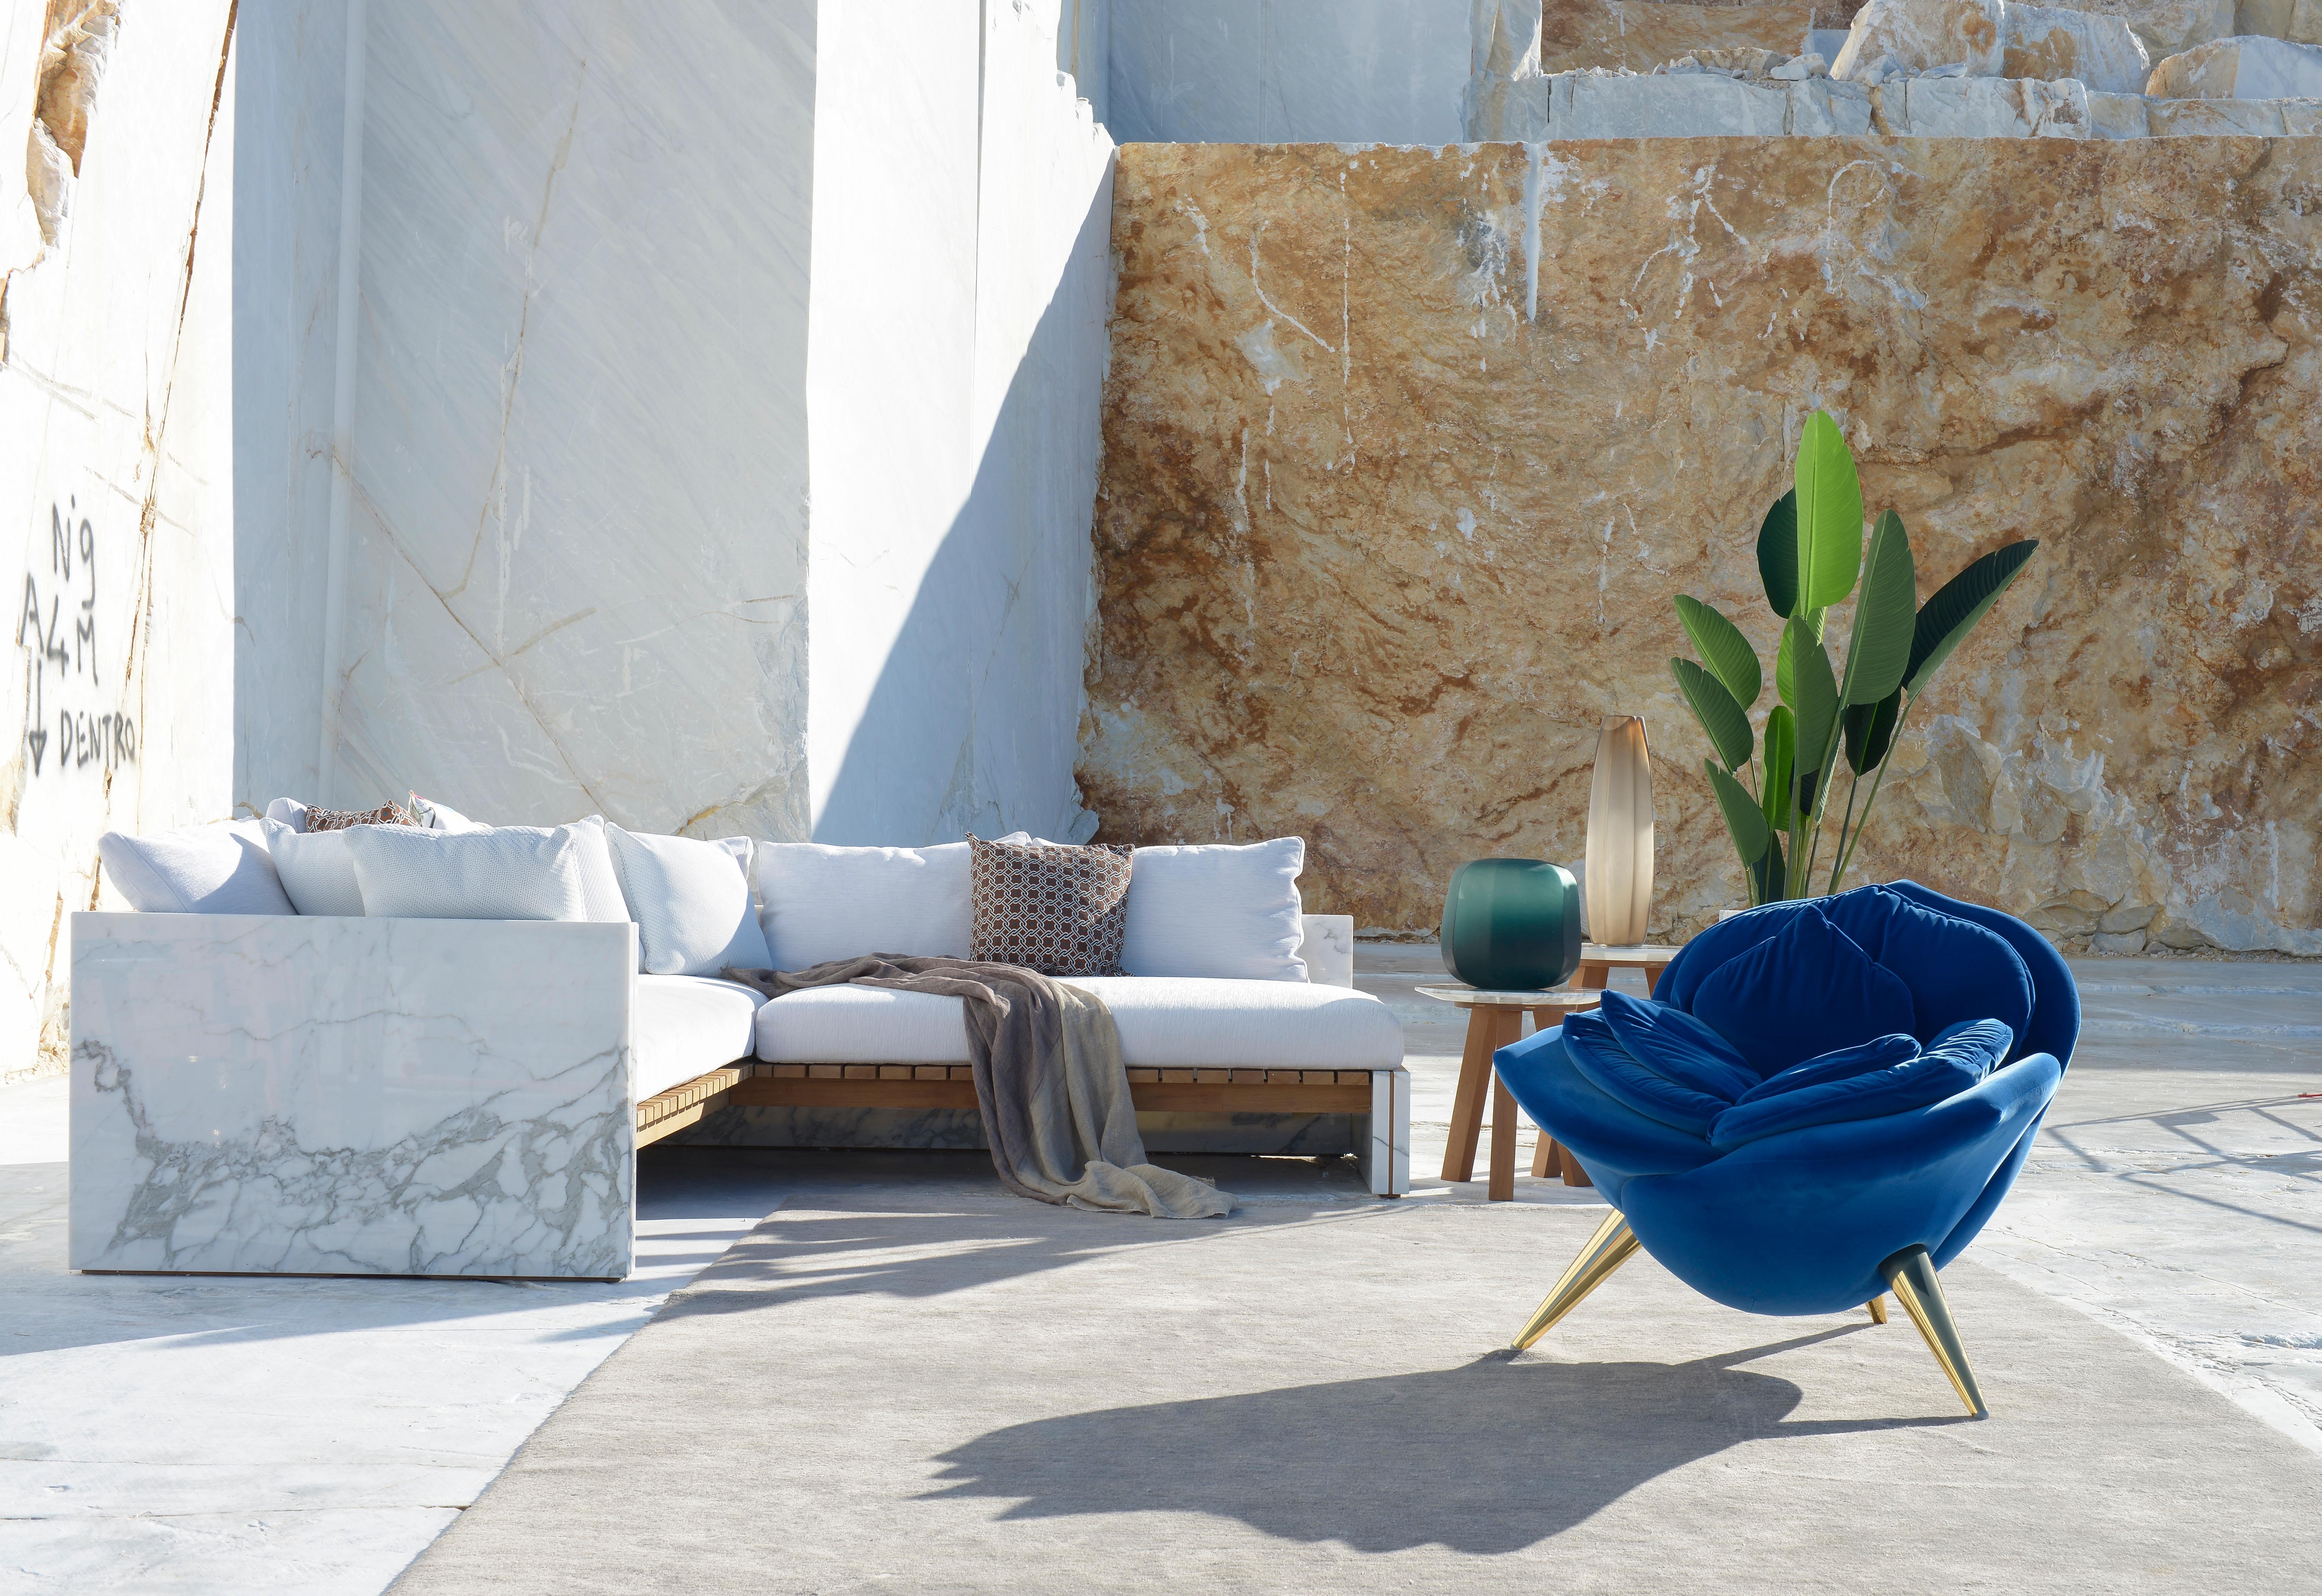 Bettogli sofa is made in Statuario marble, a rare quality of marble that is extracted from the Bettogli quarries in North Tuscany where it gets the name from.

From the quarry that is the symbol of Carrara comes an outdoor collection that enhances